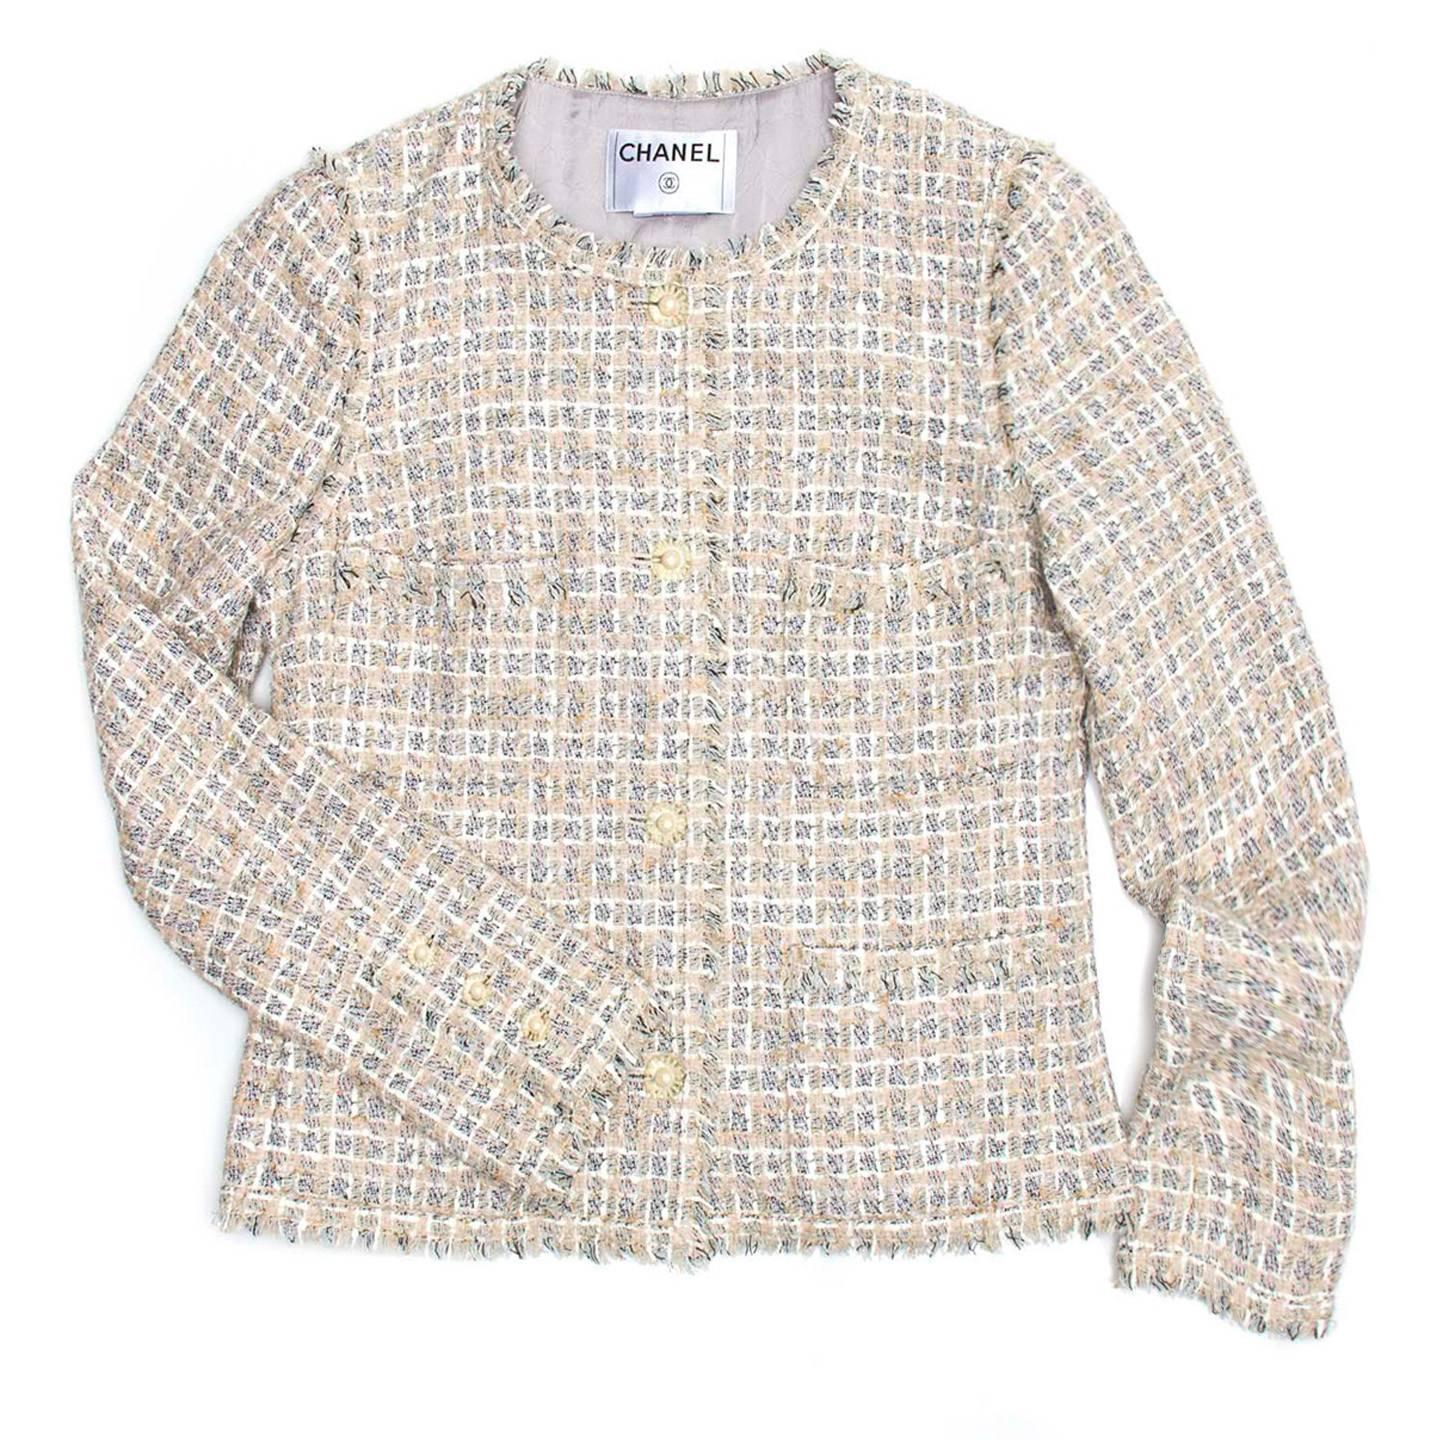 04P Collection: Signature tweed pale pink, blue, & white plaid jacket with plexi buttons with CC Logo.

Size 40 French sizing

Condition Pristine and Excellent